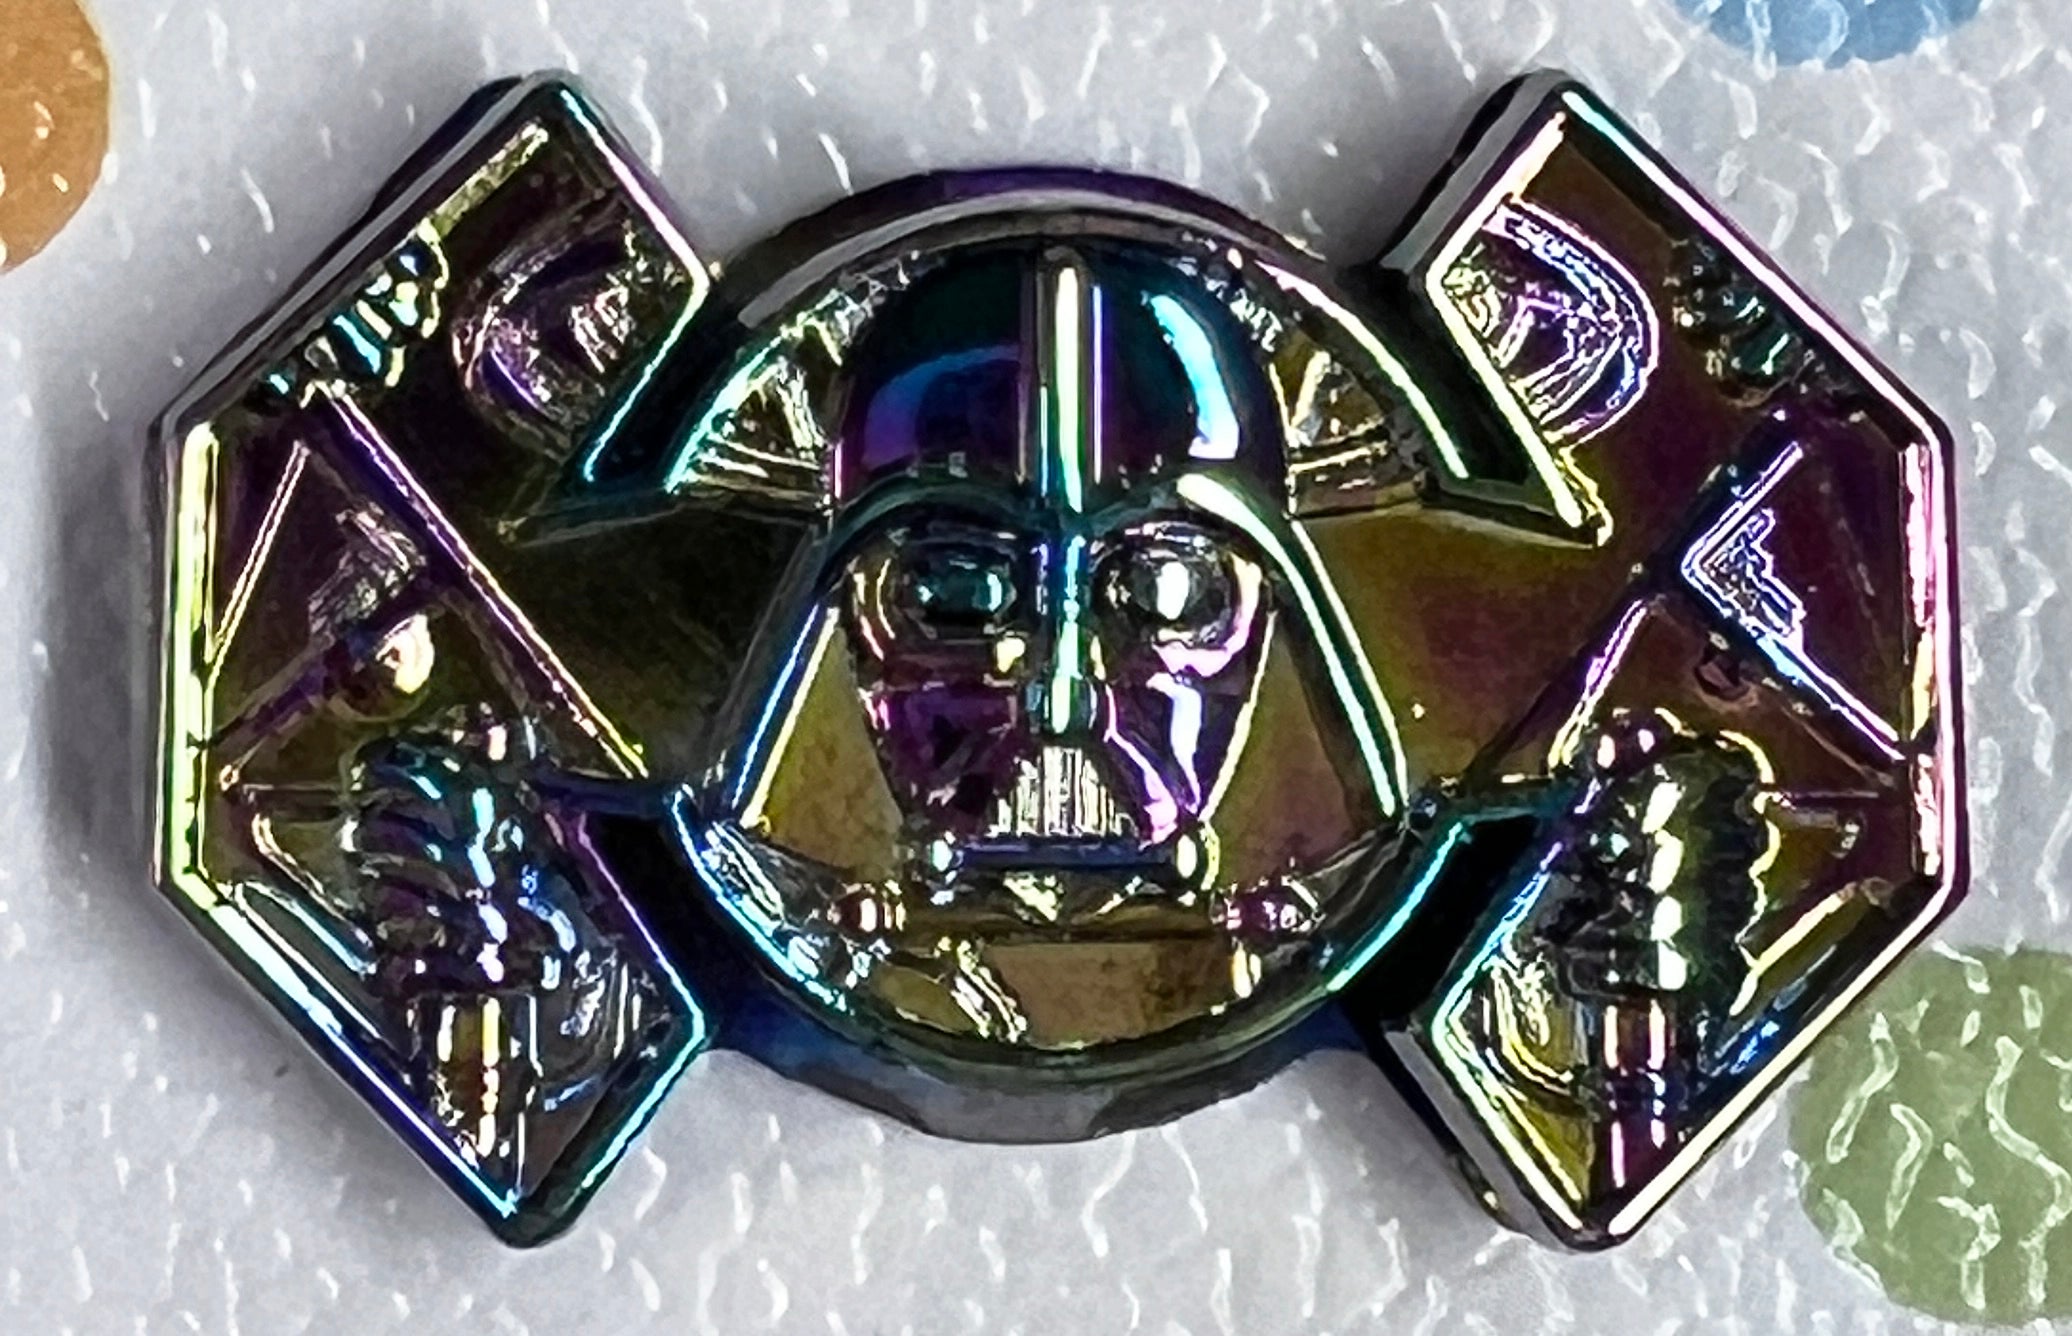 RETAIL HARDWARE Sith Lord in Flight Magnet